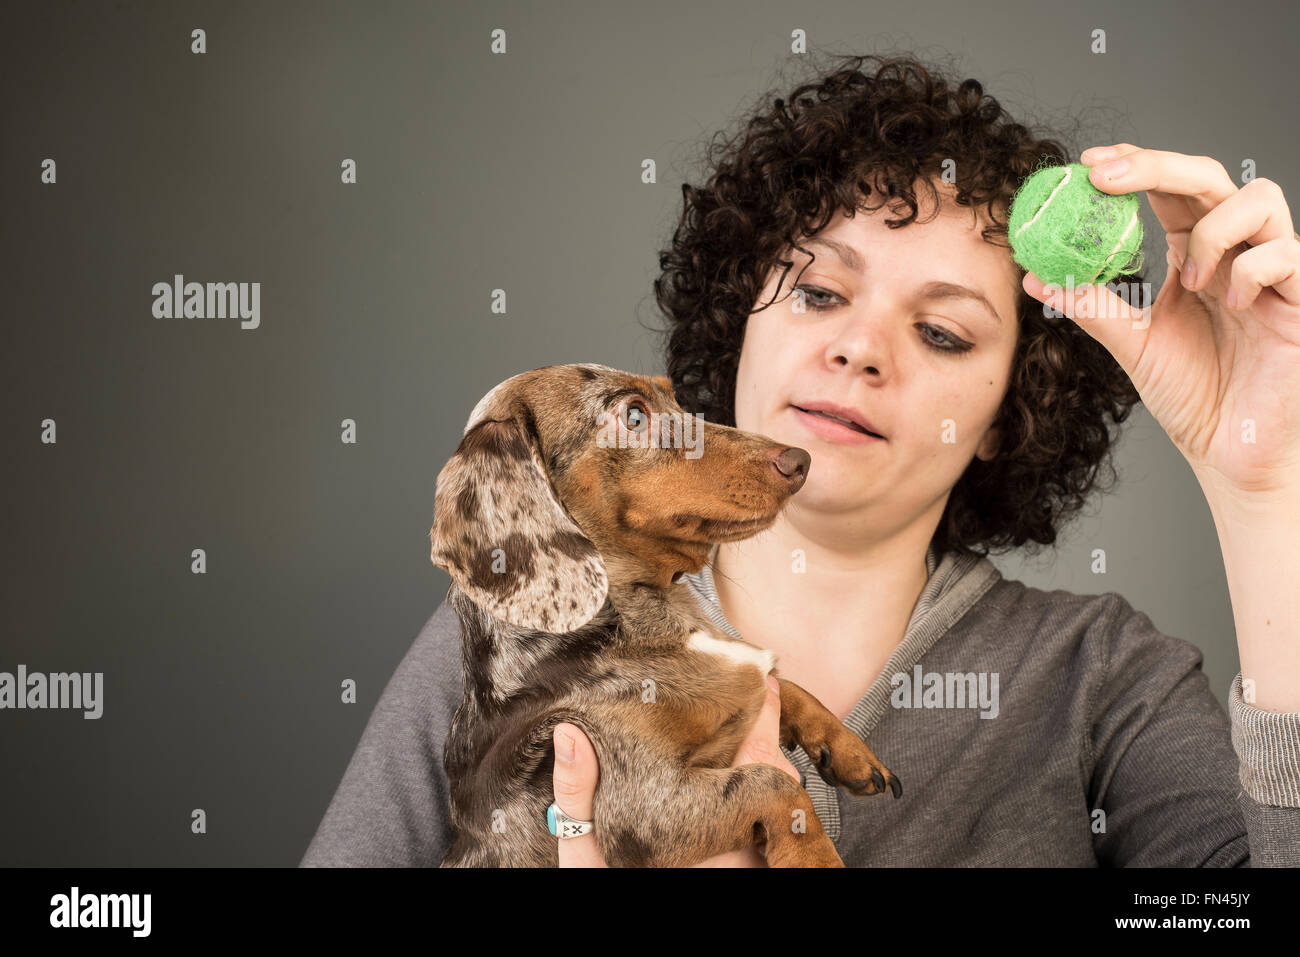 Pretty Caucasian woman with curly brown hair holding small tennis ball in front of dapple dachshund Stock Photo